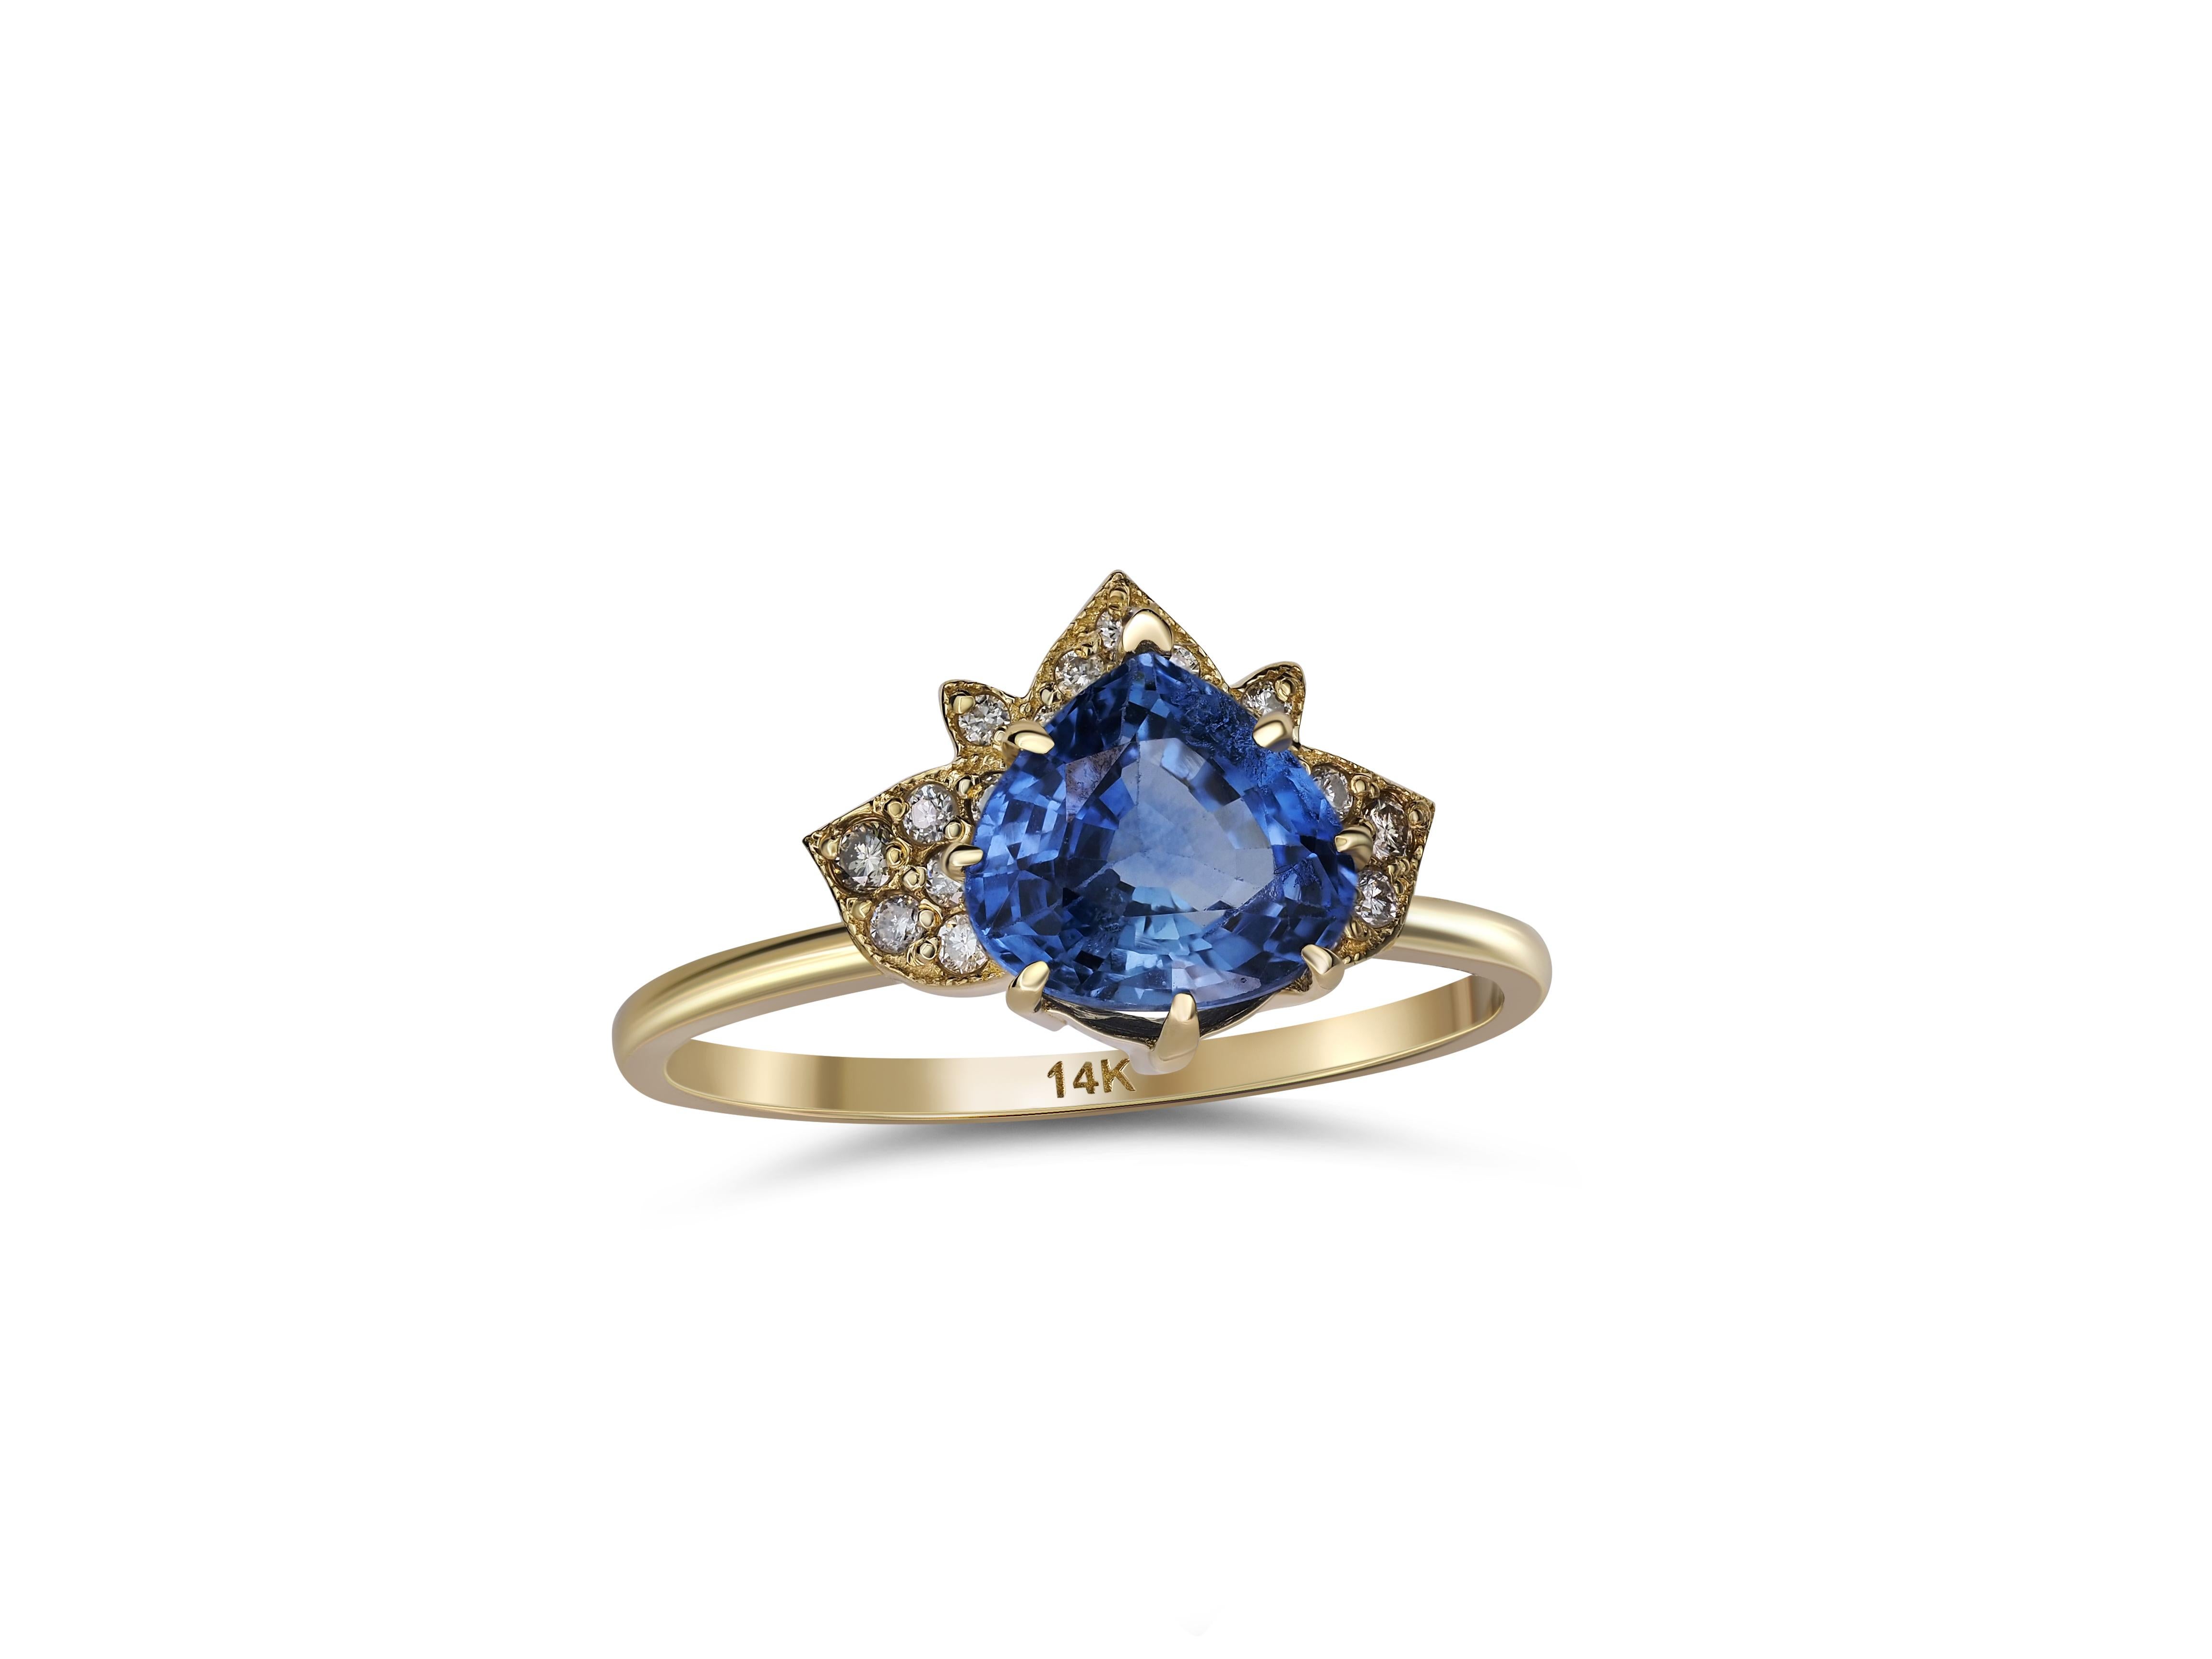 14 karat gold sapphire and diamonds ring. IGI certified. Lotus design ring.

14 karat yellow gold
Ring size: 17mm
Total weight: 2.2 g

Set with sapphire, color - blue
pear cut, 1.79 ct.
Clarity: Transparent
Origin: Shri Lanka confirmed in